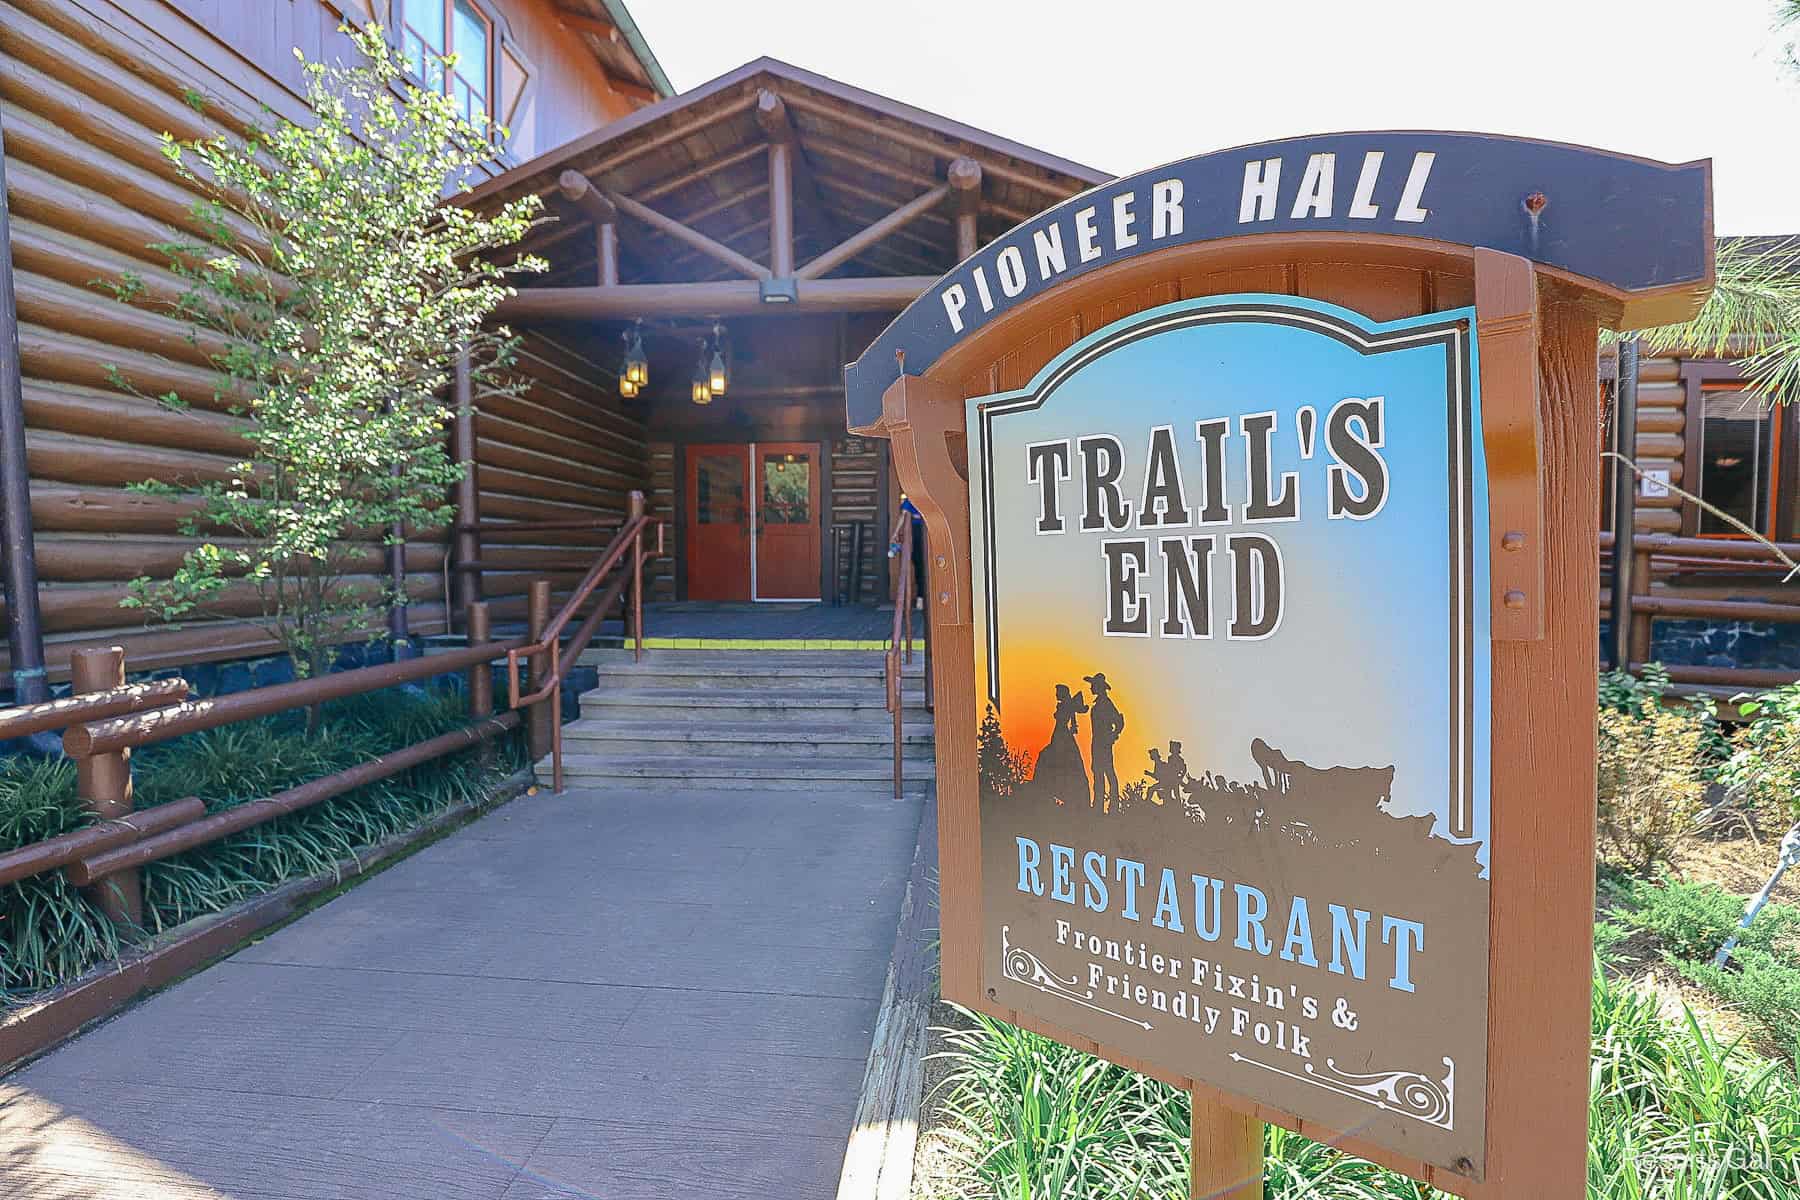 Trail’s End Restaurant at Disney’s Fort Wilderness (What You Can Expect + Photos)